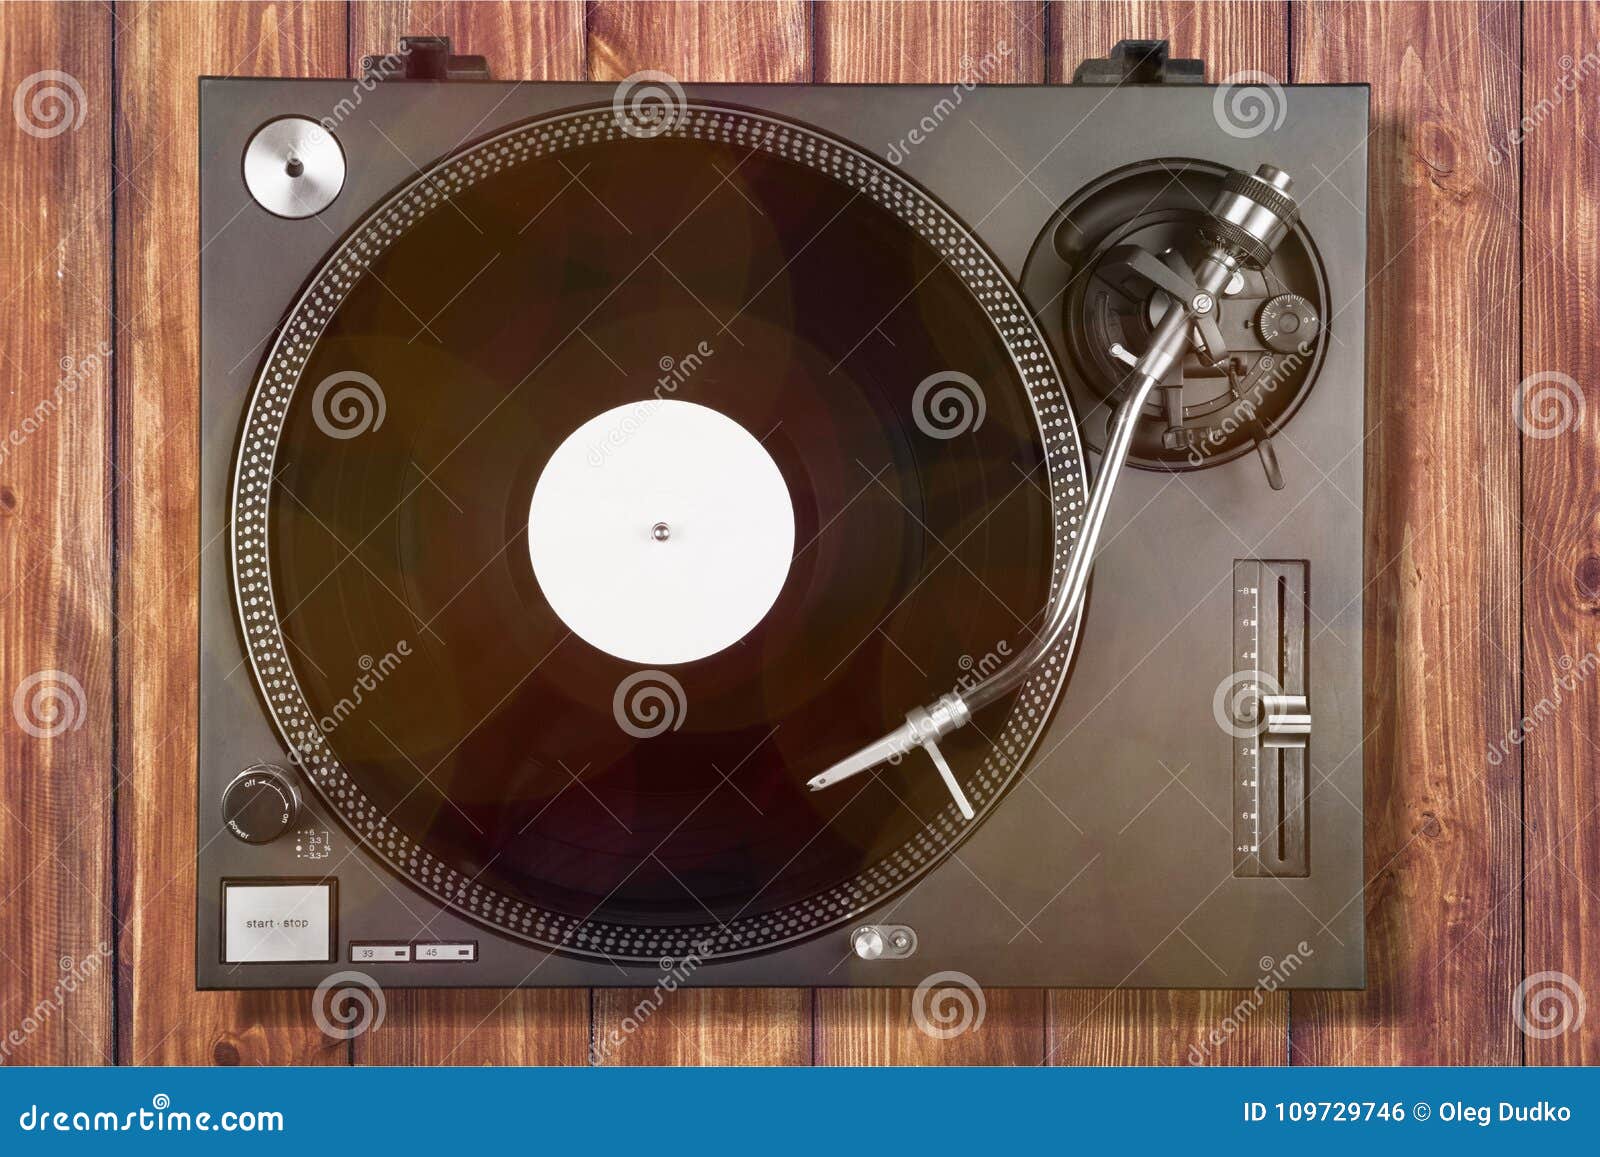 Modern Vinyl Player Close Up View Stock Photo Image Of Playing Records